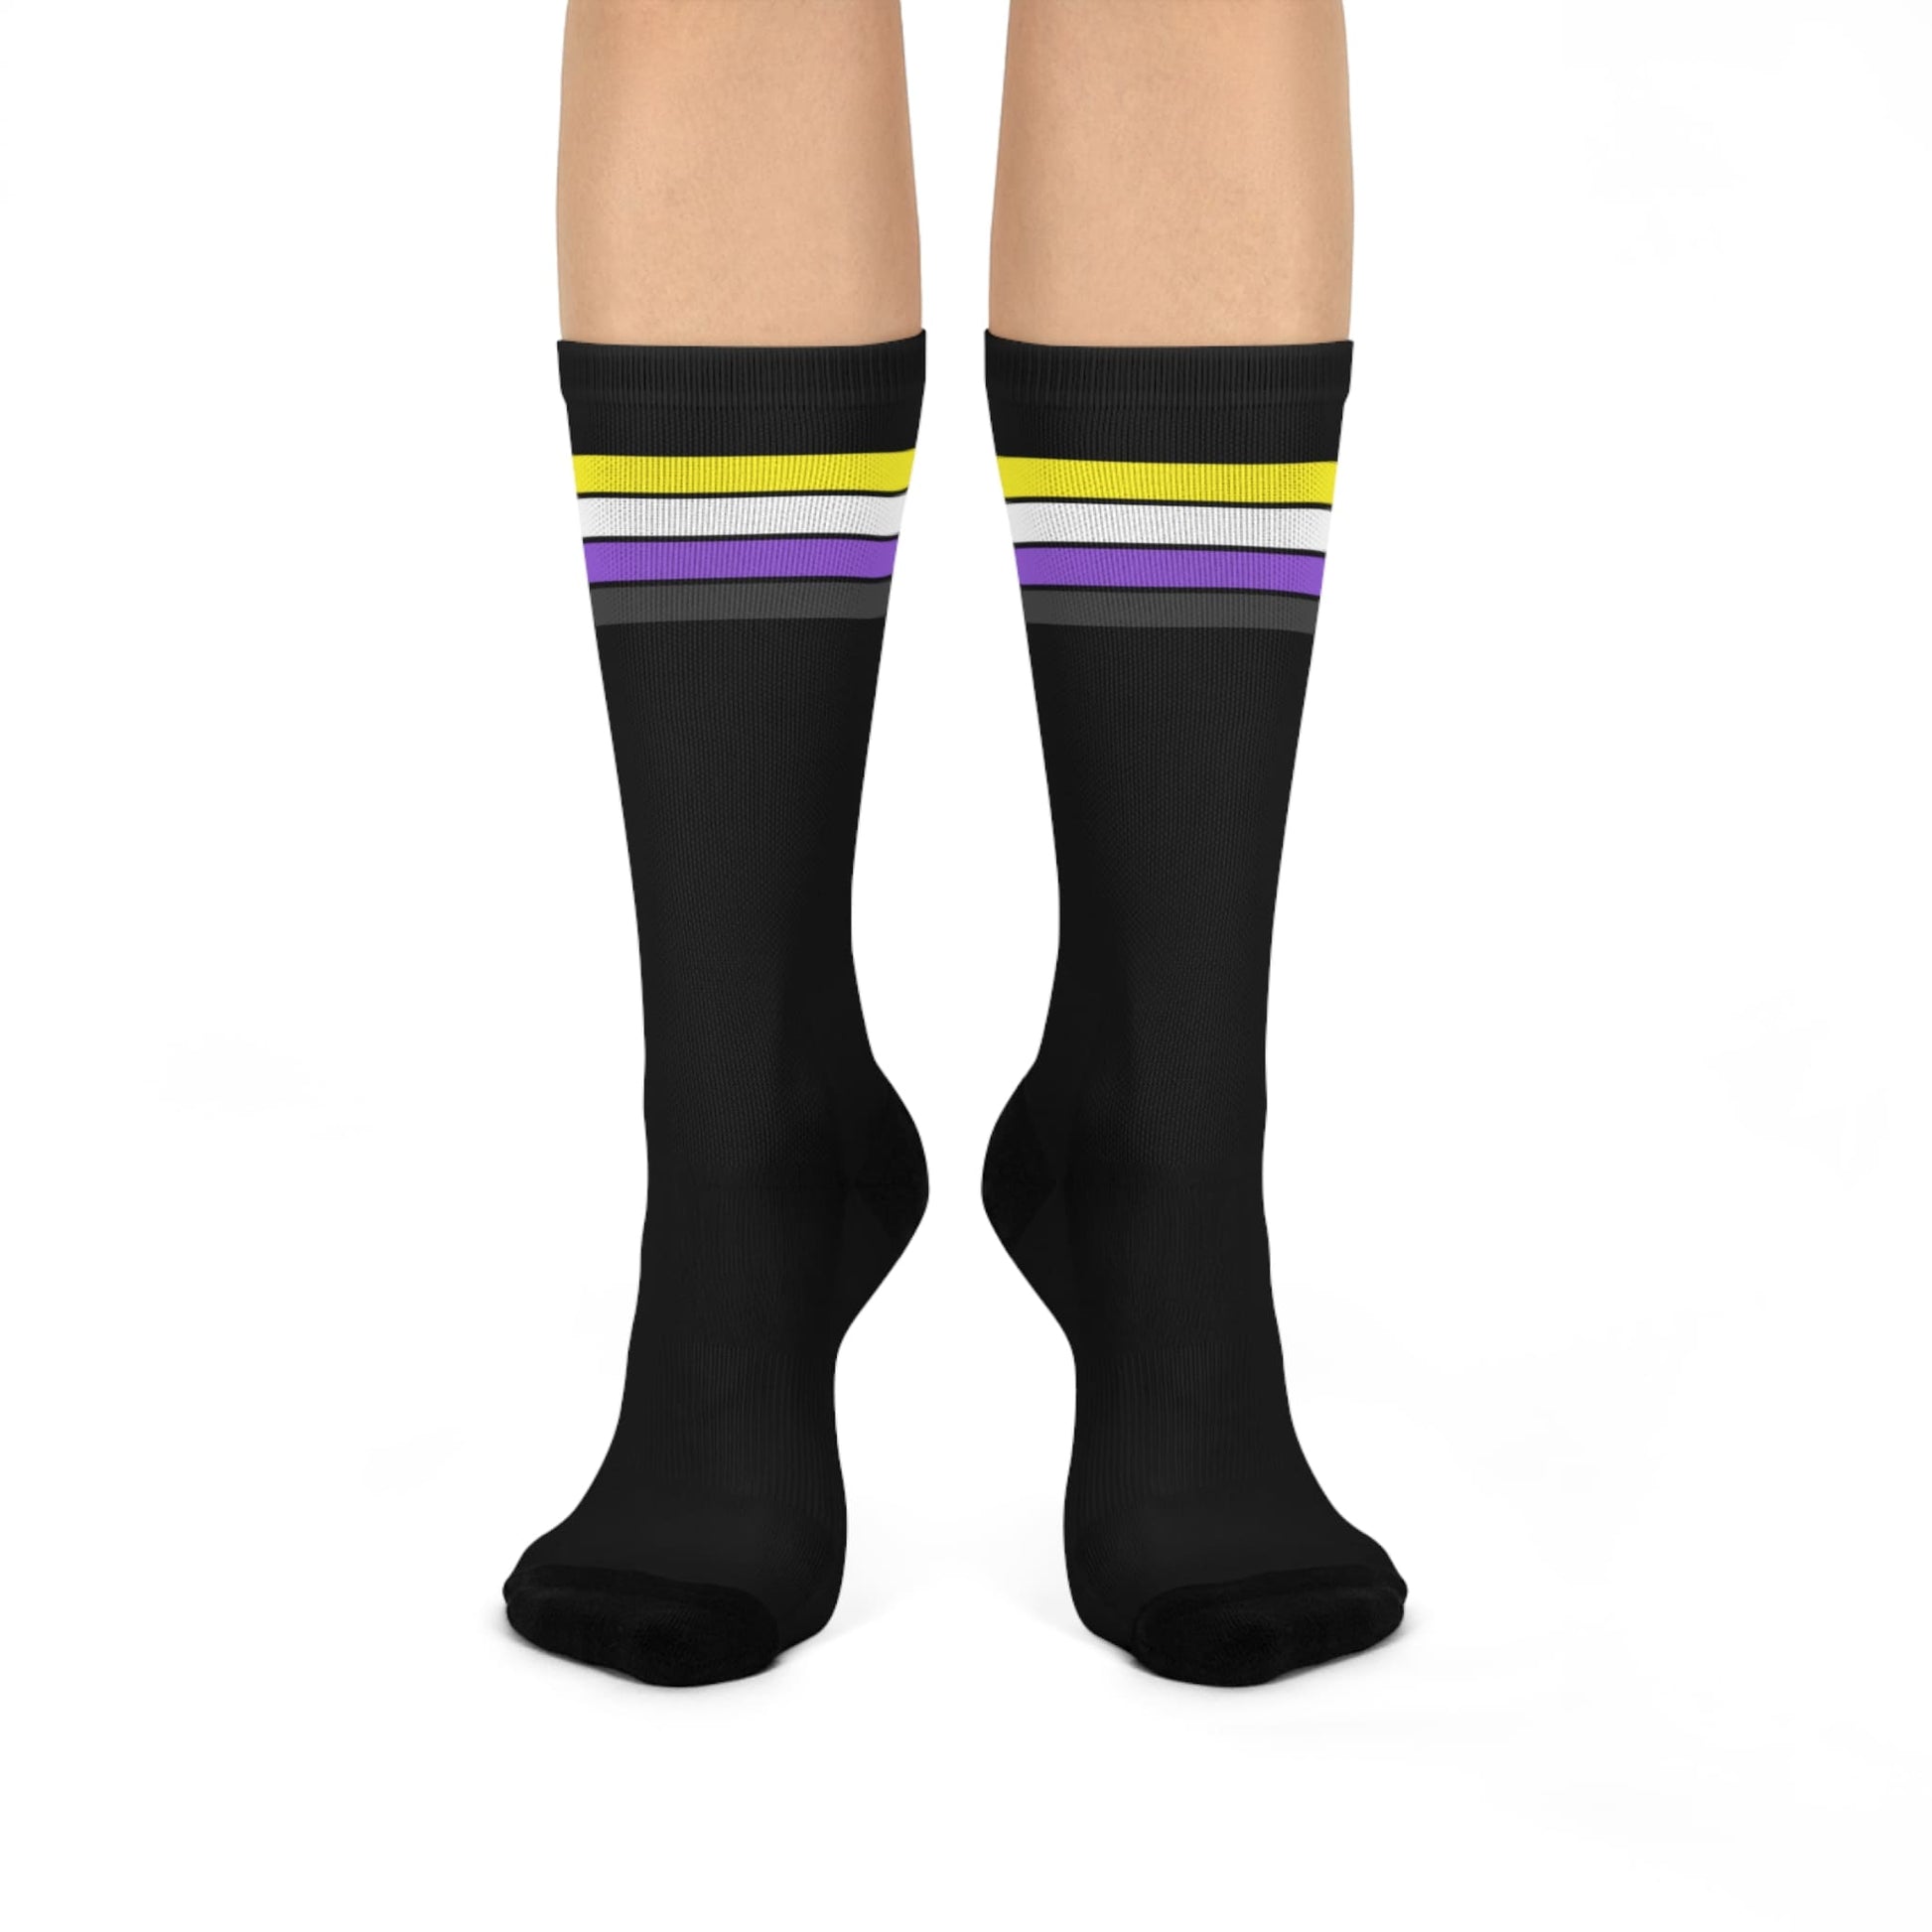 nonbinary socks, enby pride flag, front